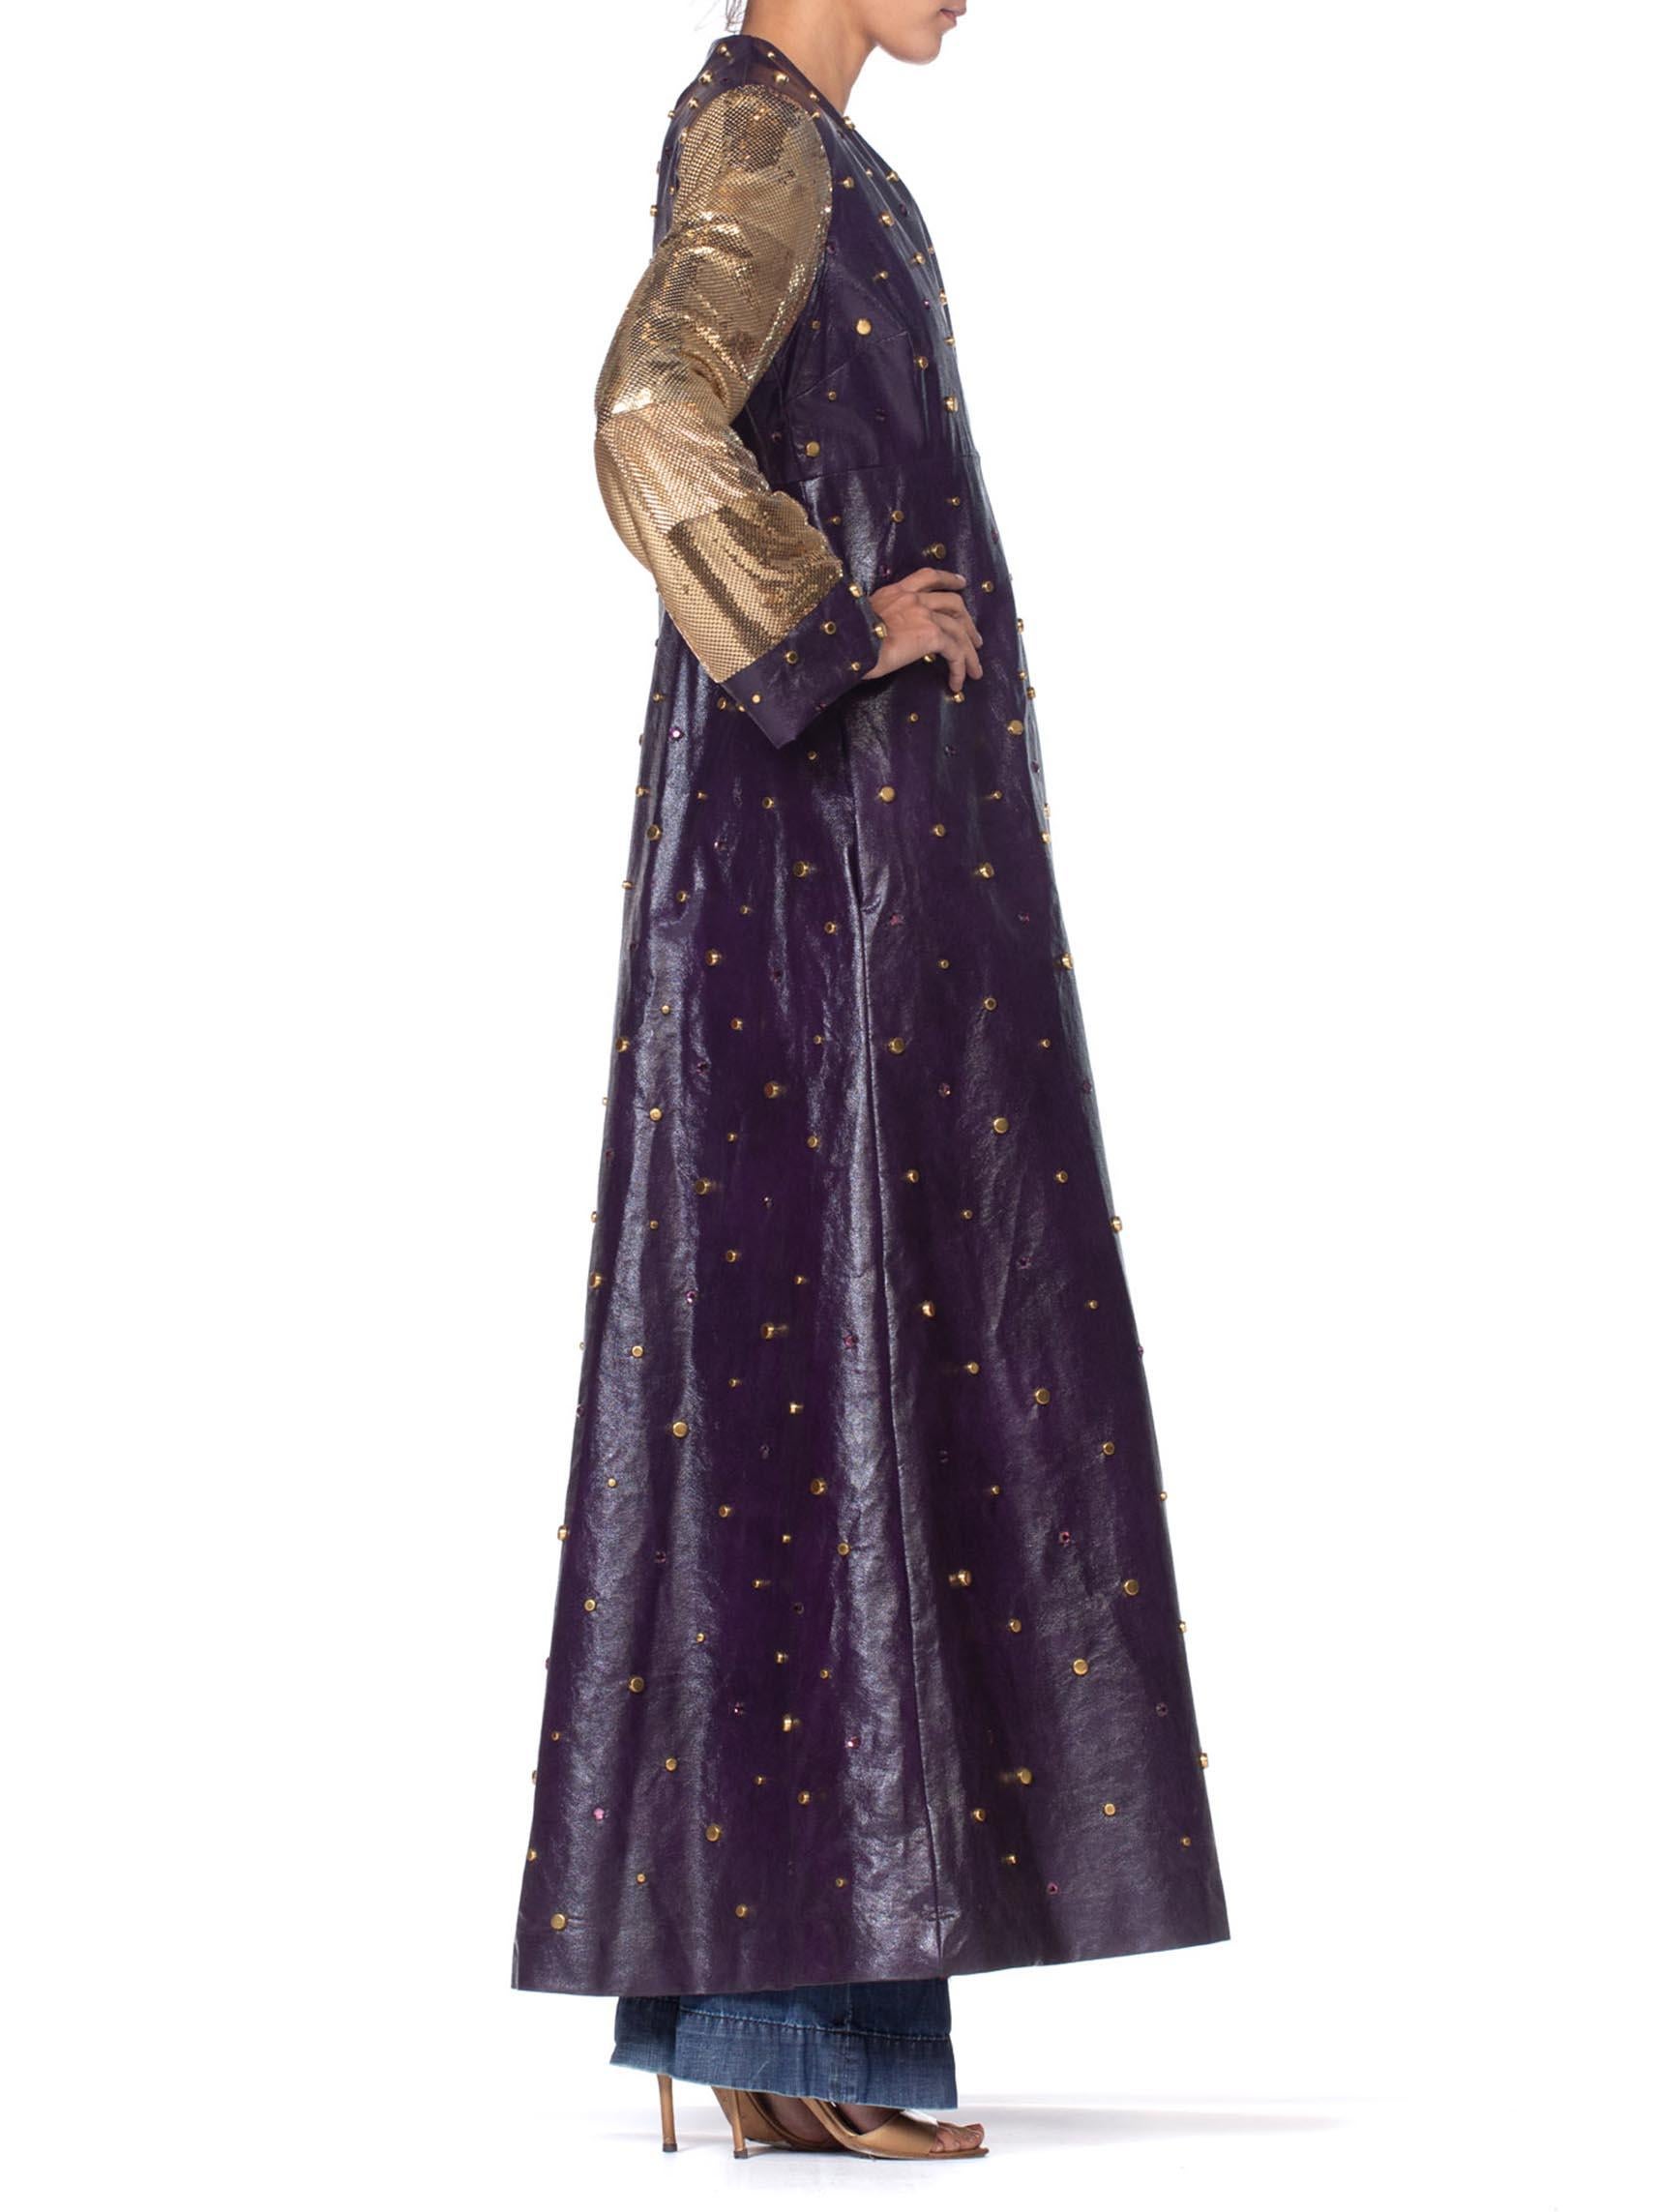 MORPHEW COLLECTION Eggplant Purple Crystal Studded Pleather Maxi Coat With Gold In Excellent Condition For Sale In New York, NY